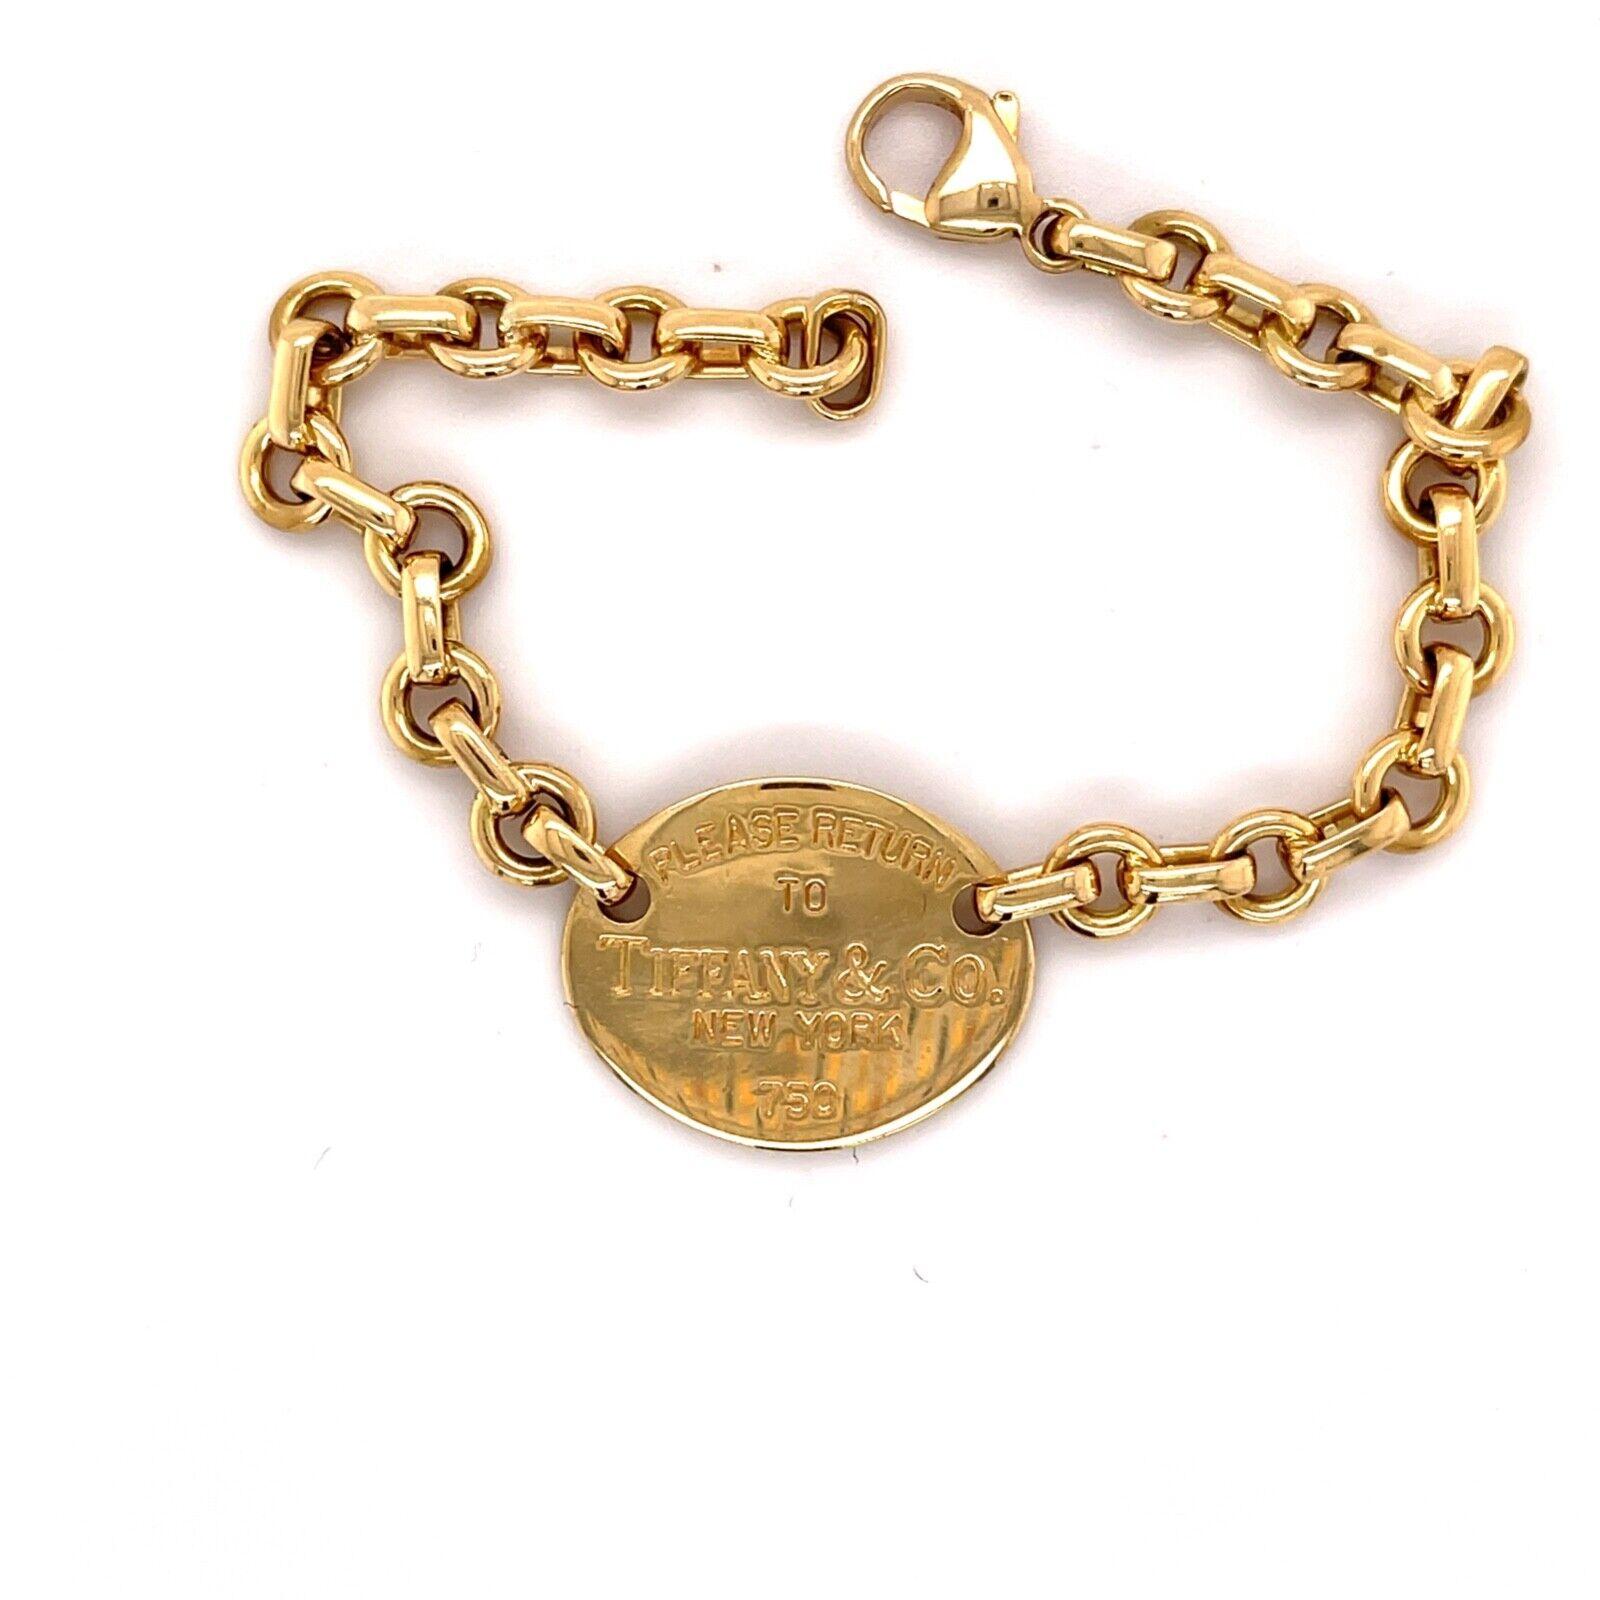 Tiffany & Co. 18k Yellow Gold Round-Shaped Bracelet

6.25 Inches

18.9 Grams 

This is a beautiful Tiffany & Co. bracelet. If you have any questions or concerns or would like a custom order please message me and I will get back to you as soon as